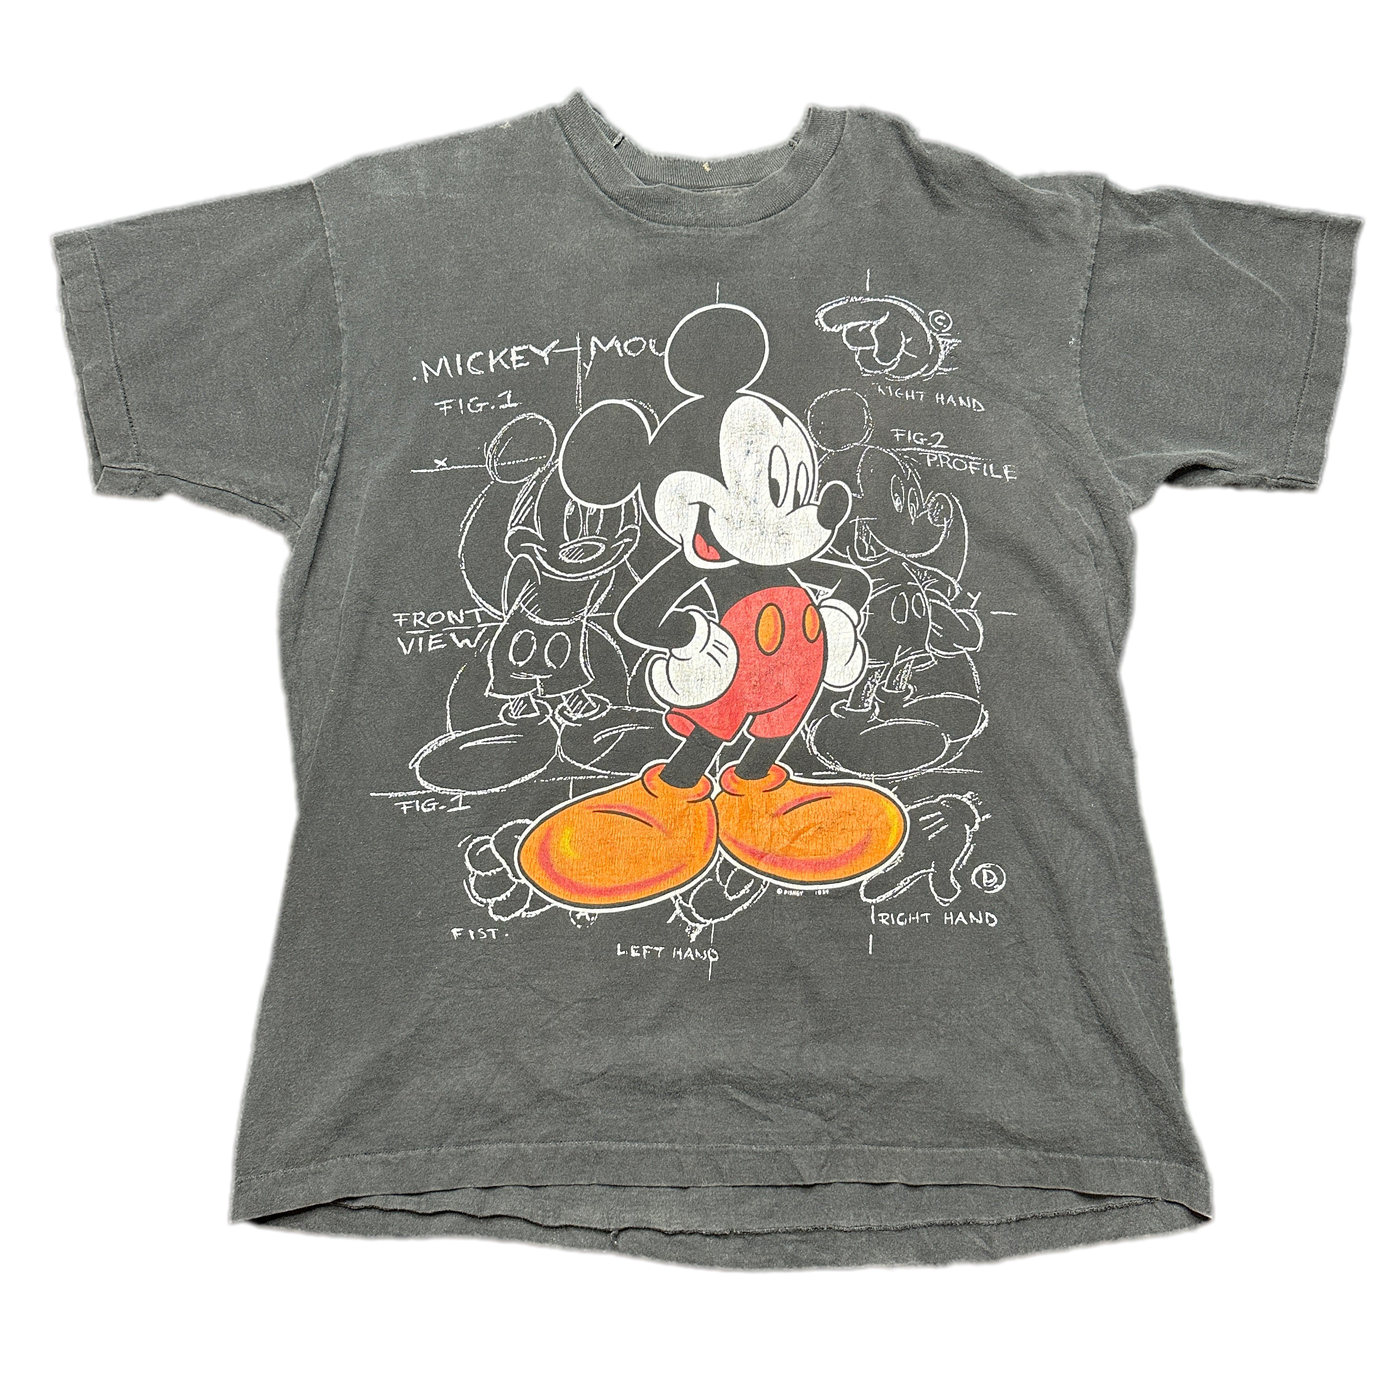 Classic Mickey Mouse Sketch Graphic T-shirt sz XL